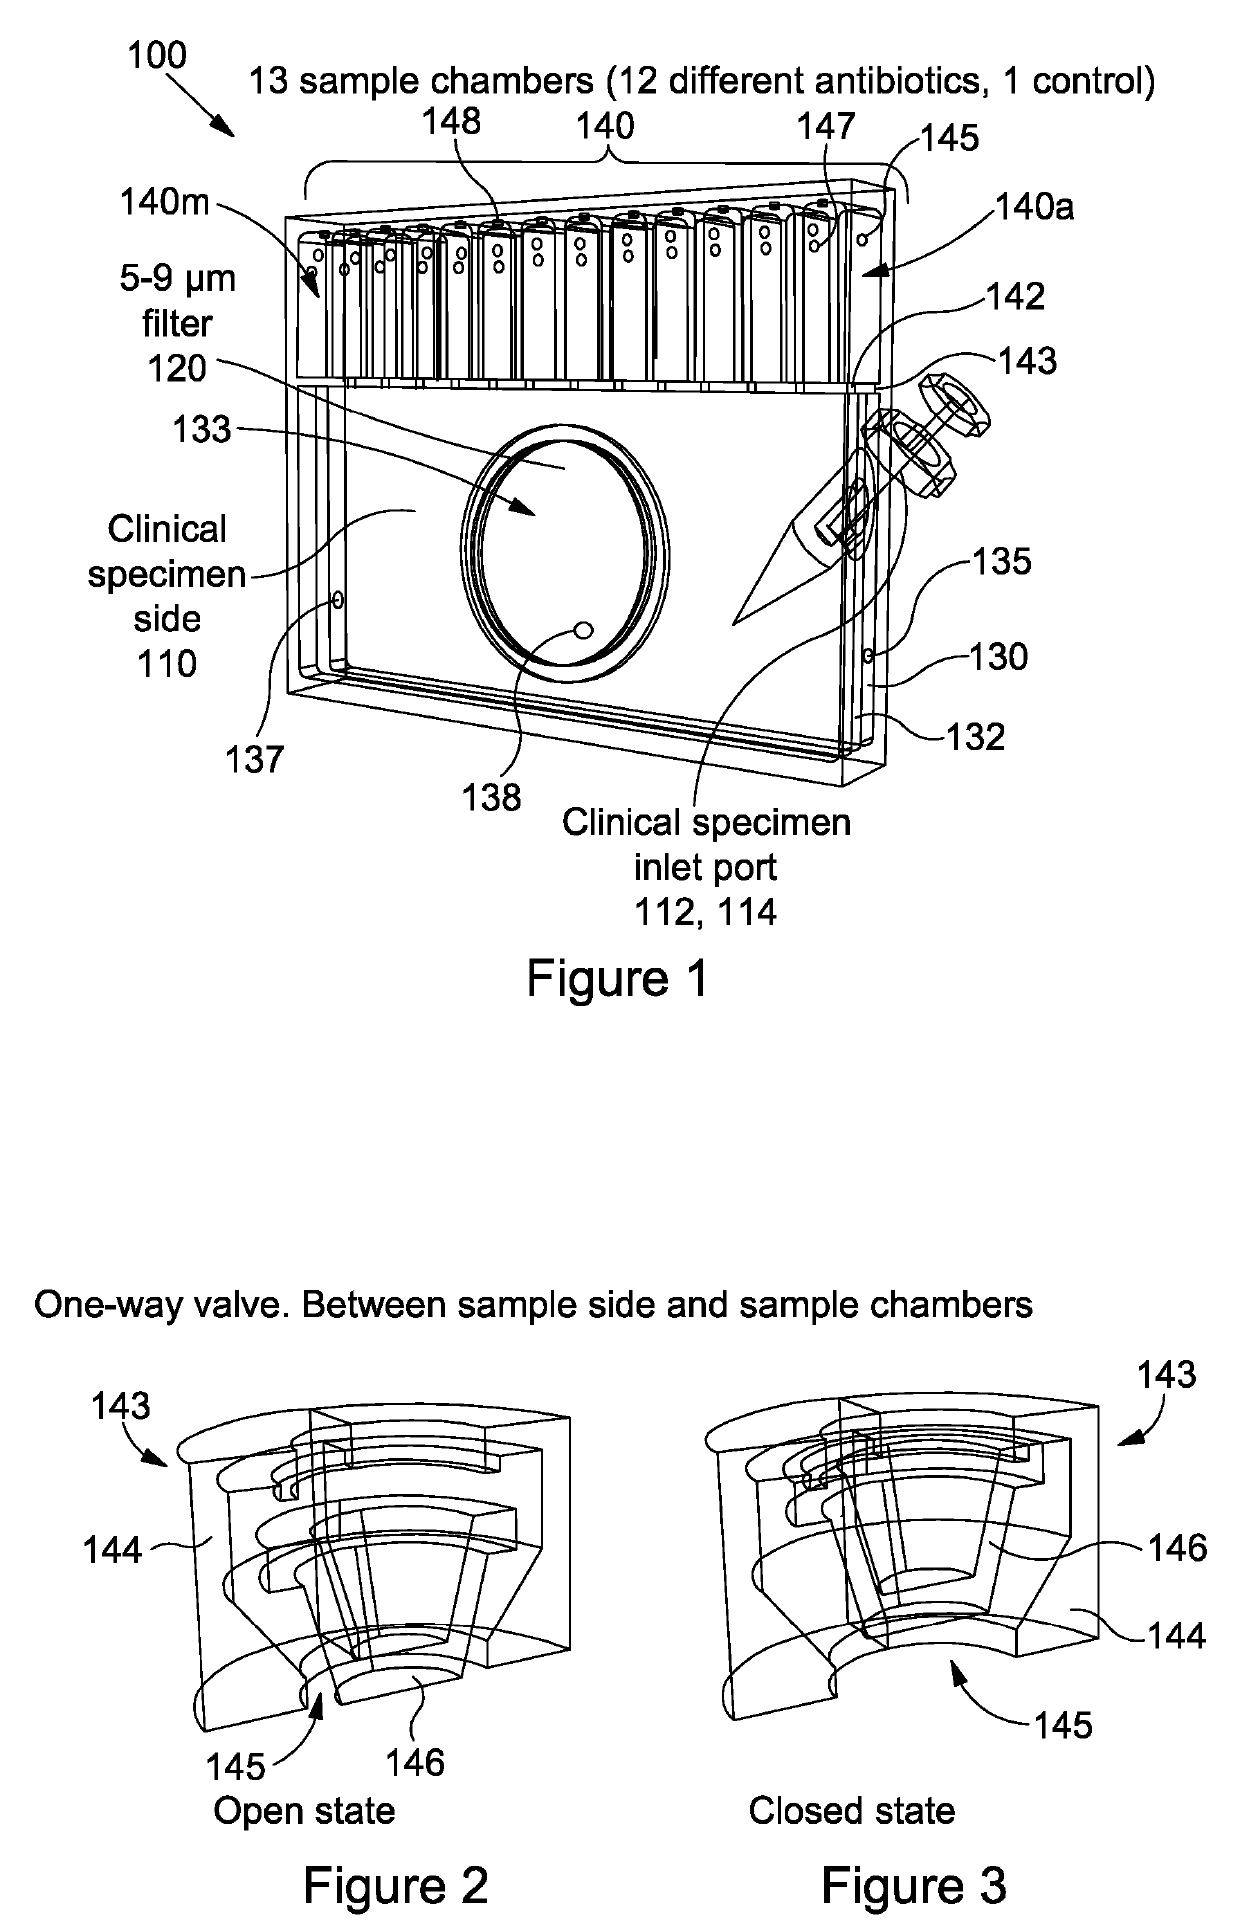 Sample detection device